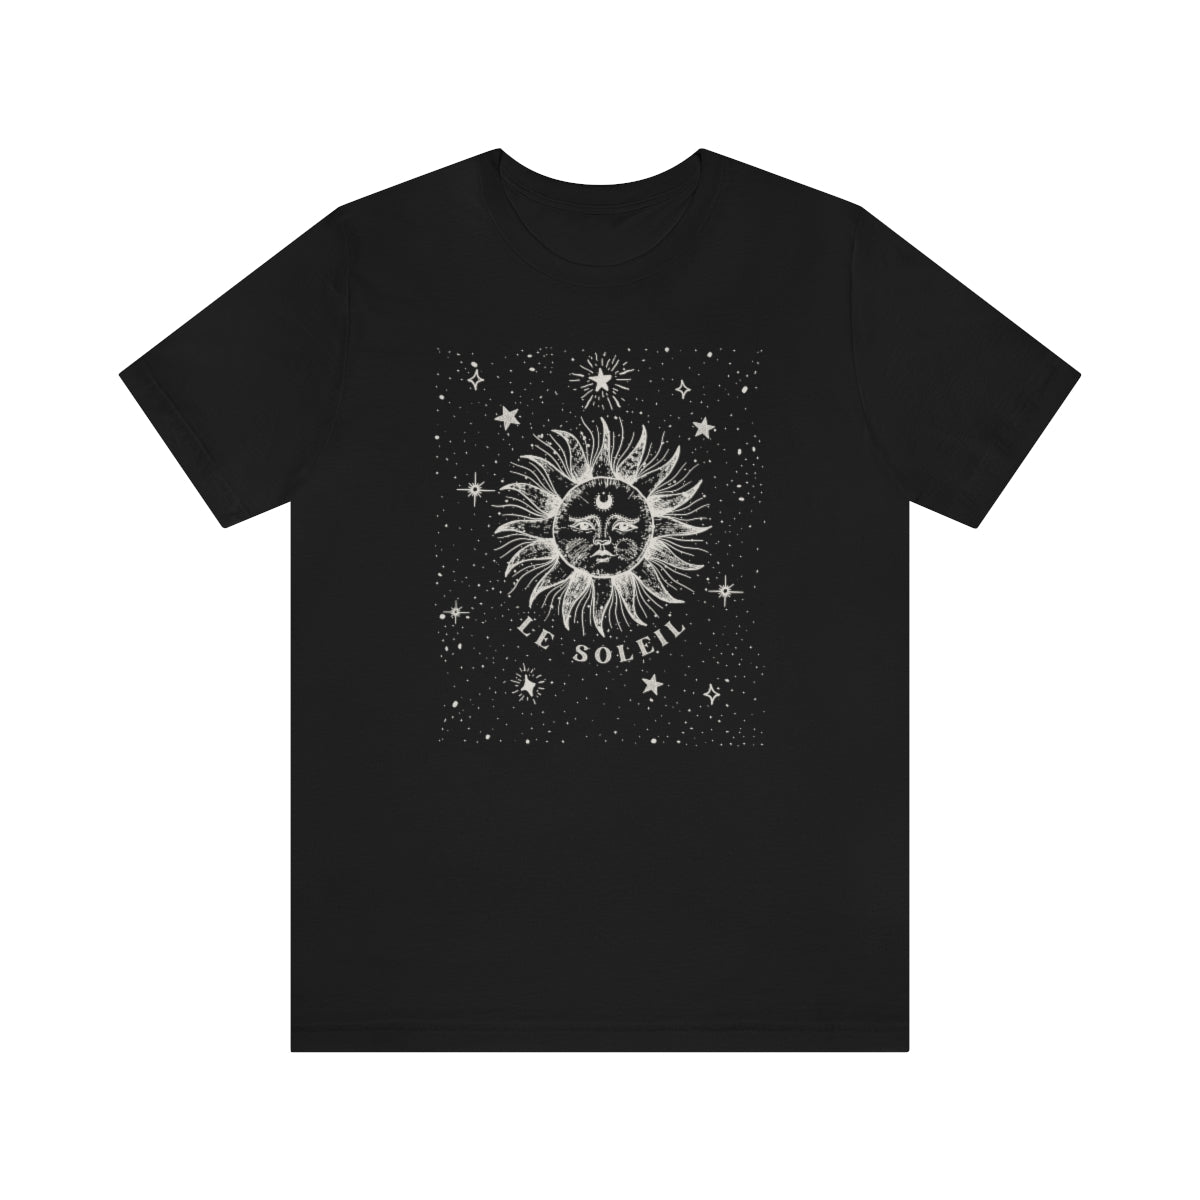 Witchy Aesthetic Sun Mystical Plus Size Shirt